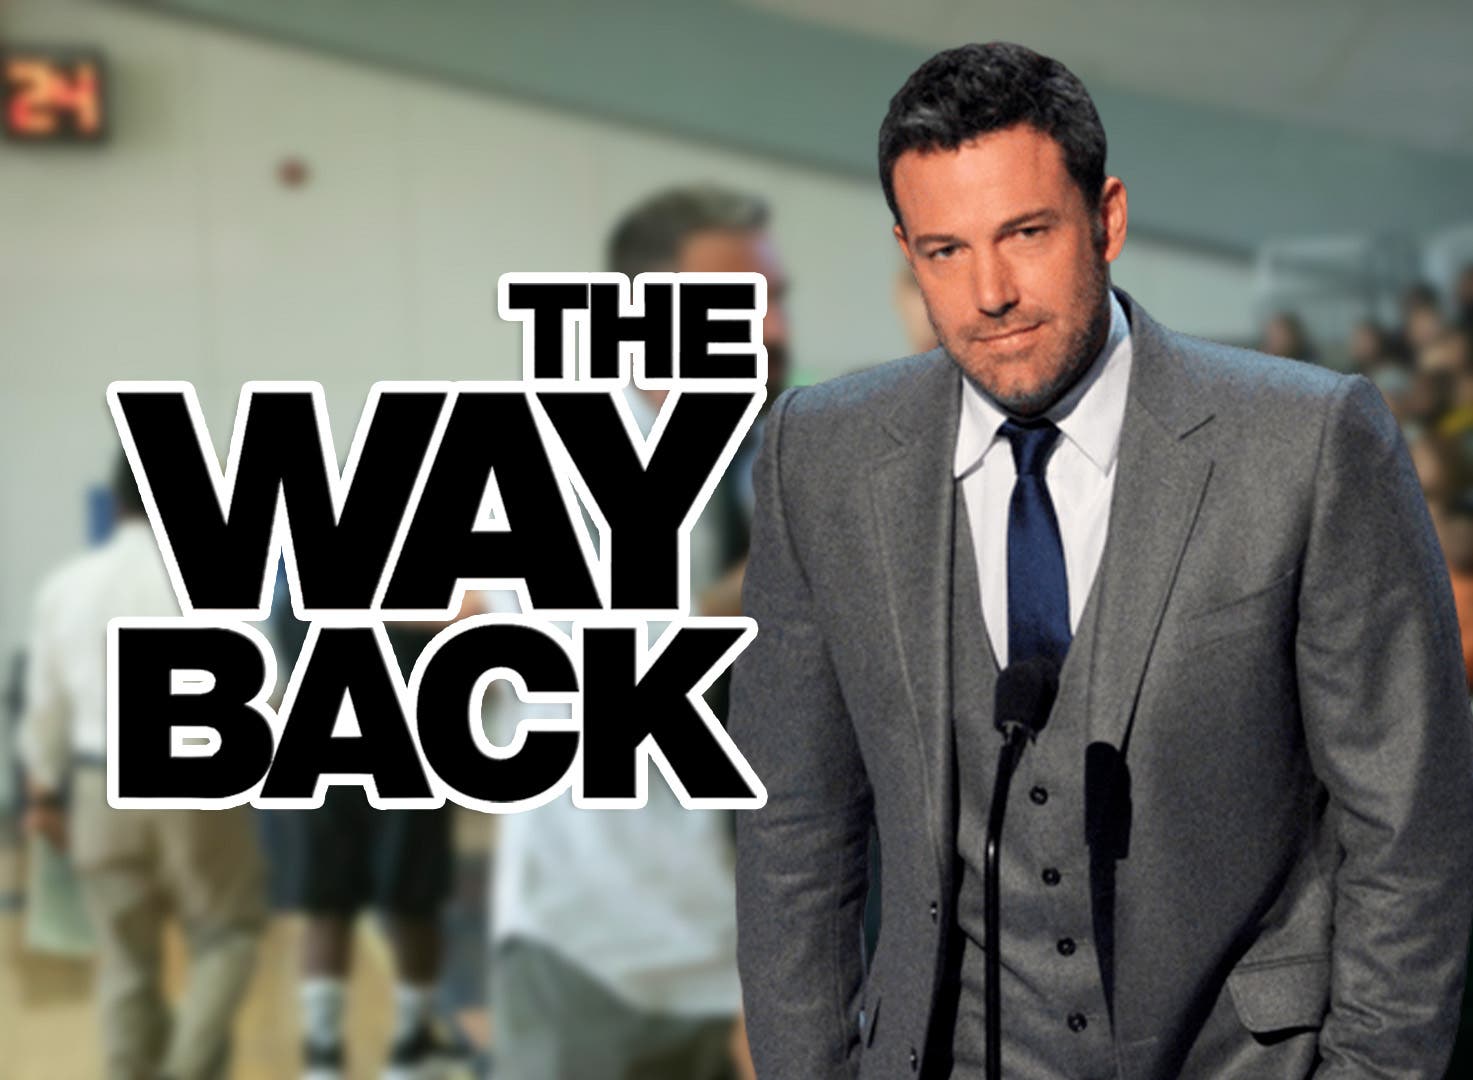 The Way Back is the Netflix movie sweeping this week that you shouldn’t miss